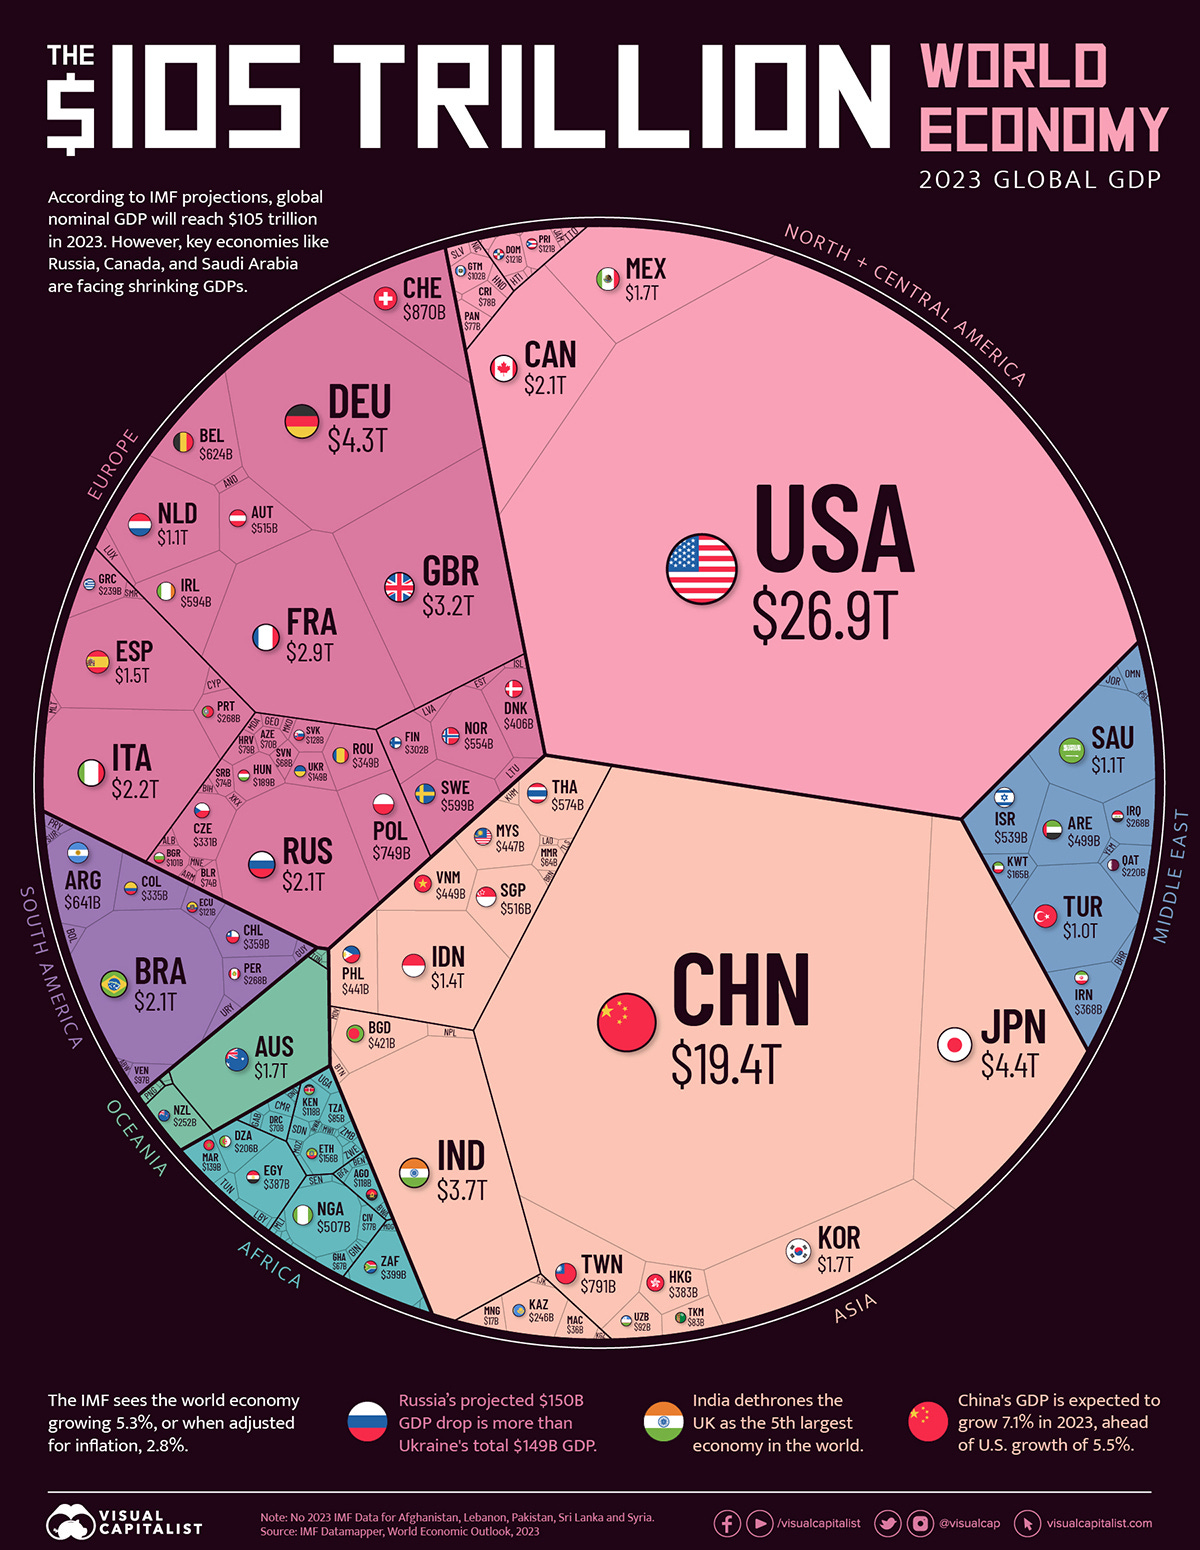 A chart showing the breakup of the world economy, organized by the size of each country's gross domestic product.